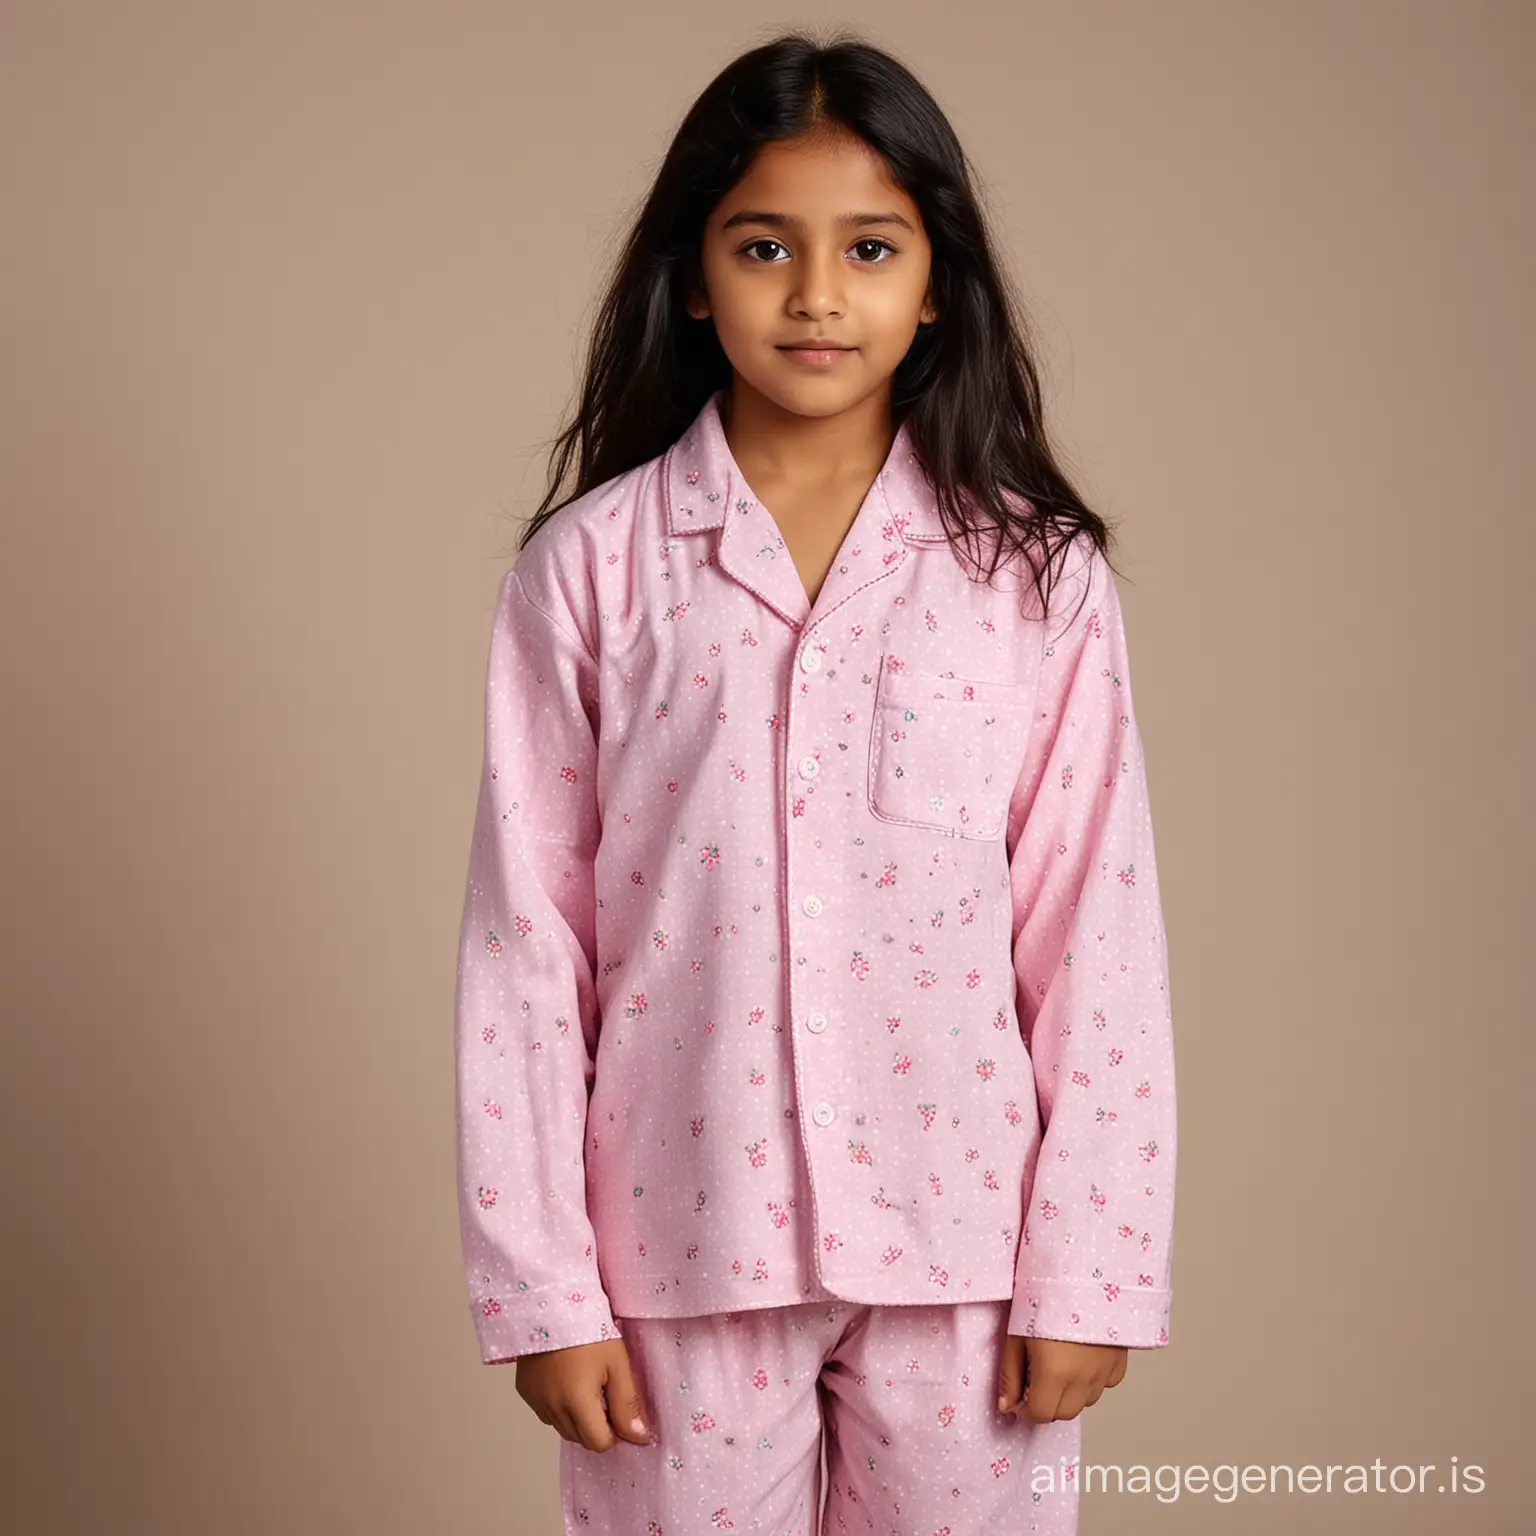 Indian-Girl-in-Pajamas-Youthful-Relaxation-and-Cultural-Comfort